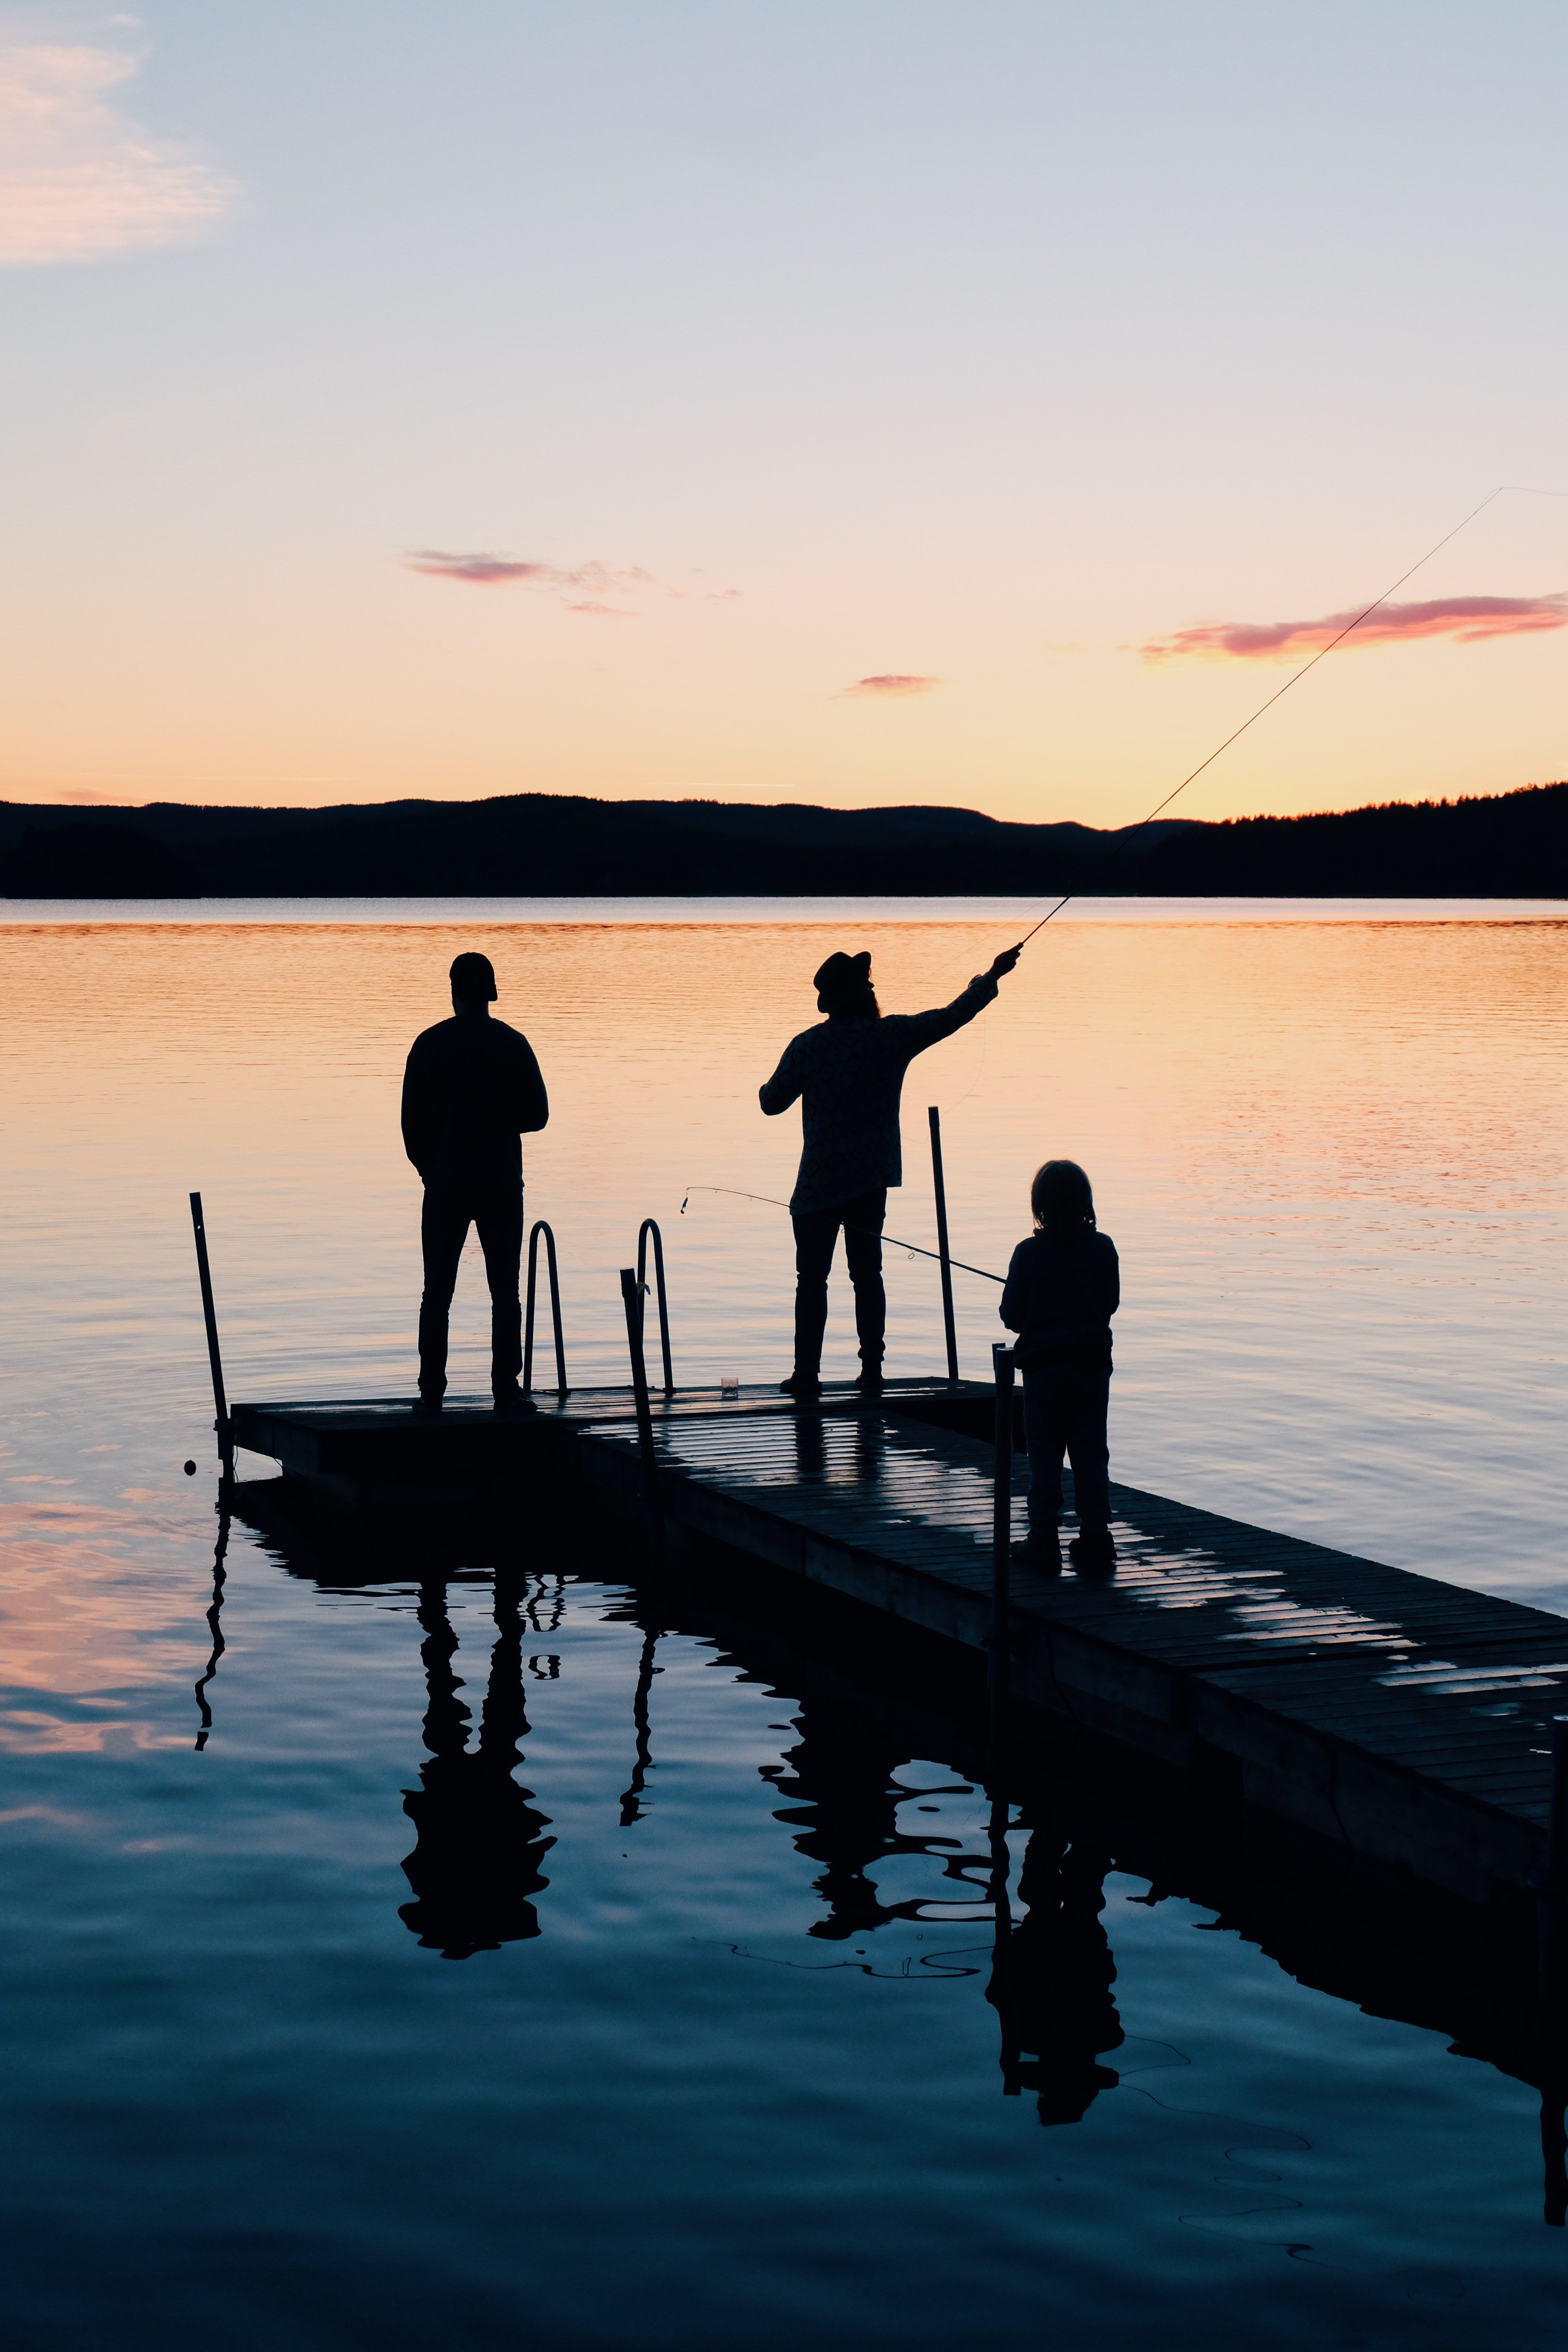 Patrick's family spent time with Peter and his family during their short trip by the lake. | Source: Olof Nyman/Pexels